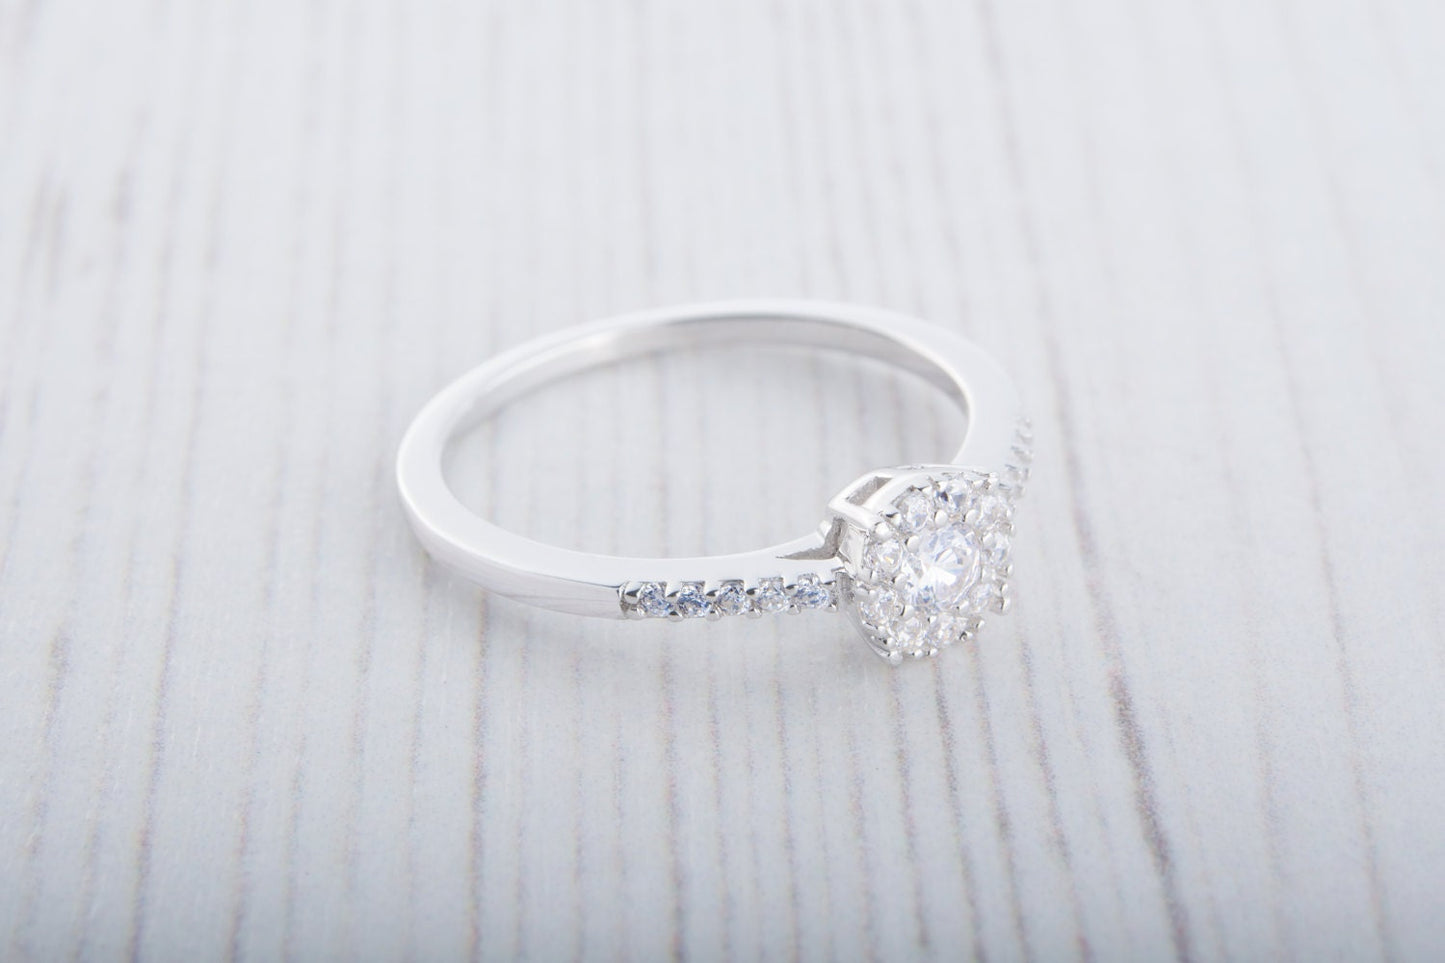 Genuine Moissanite Engagement Ring - Available in Sterling Silver or White Gold Filled - Handmade